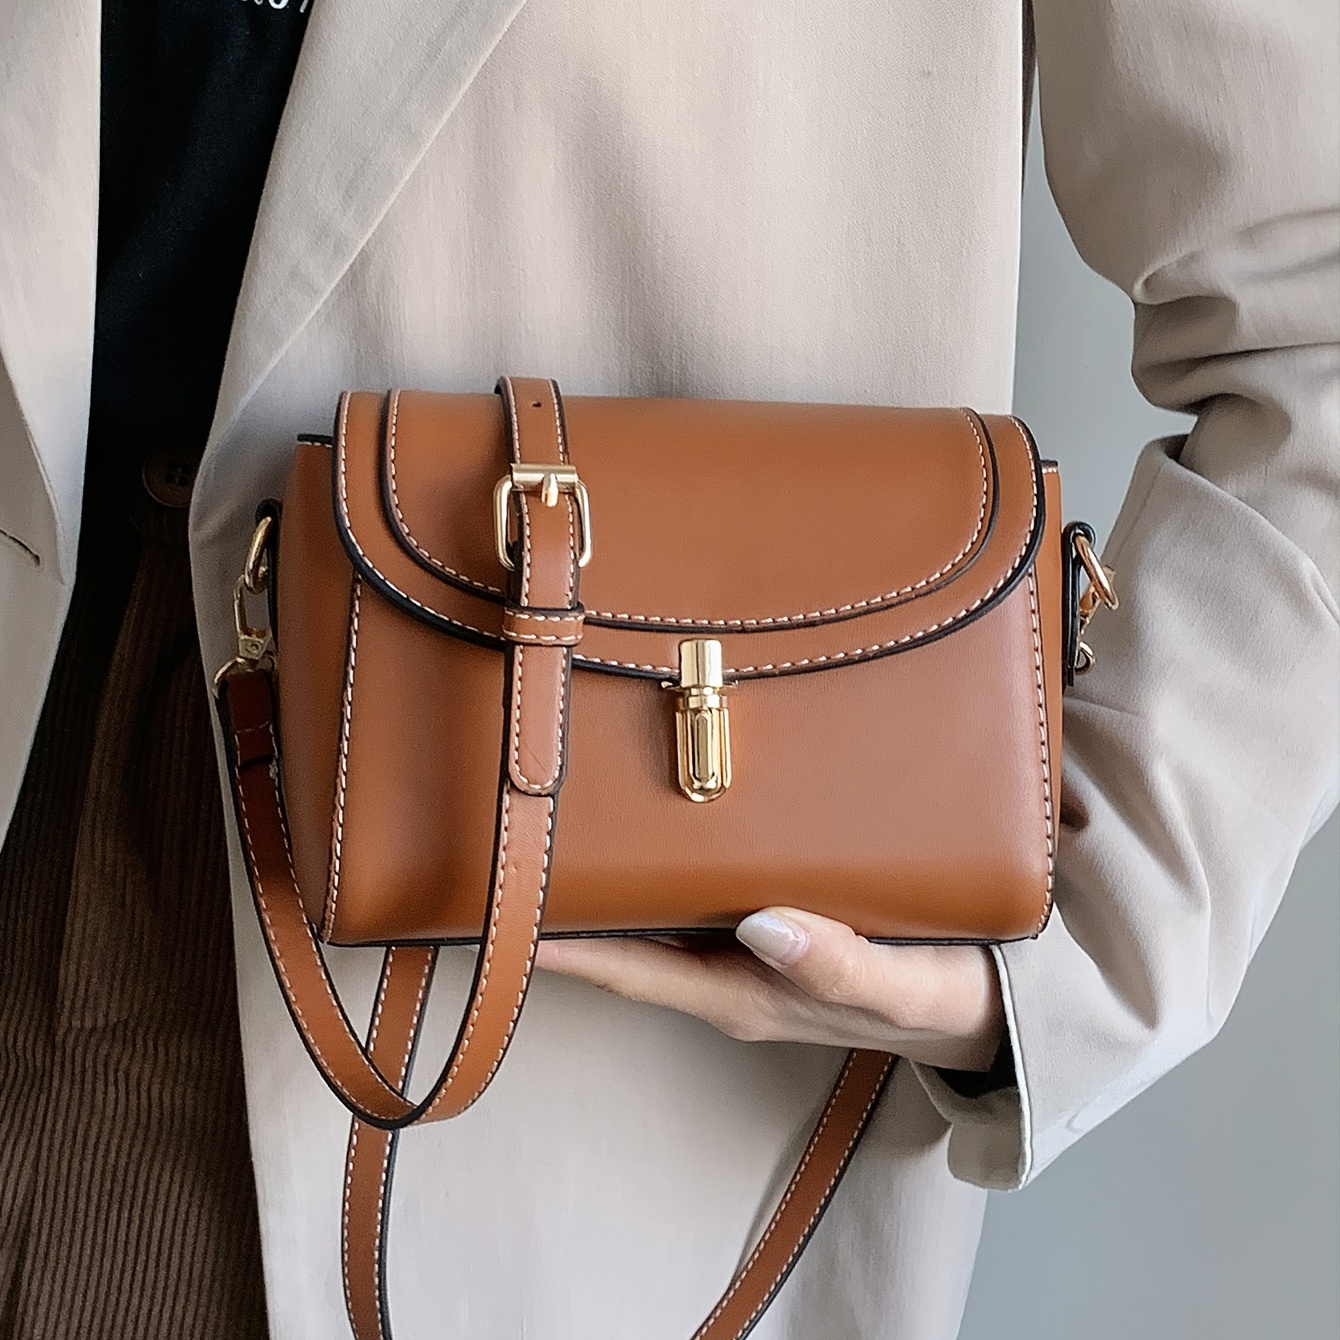 A Love Letter to the Loewe Puzzle Bag - PurseBlog